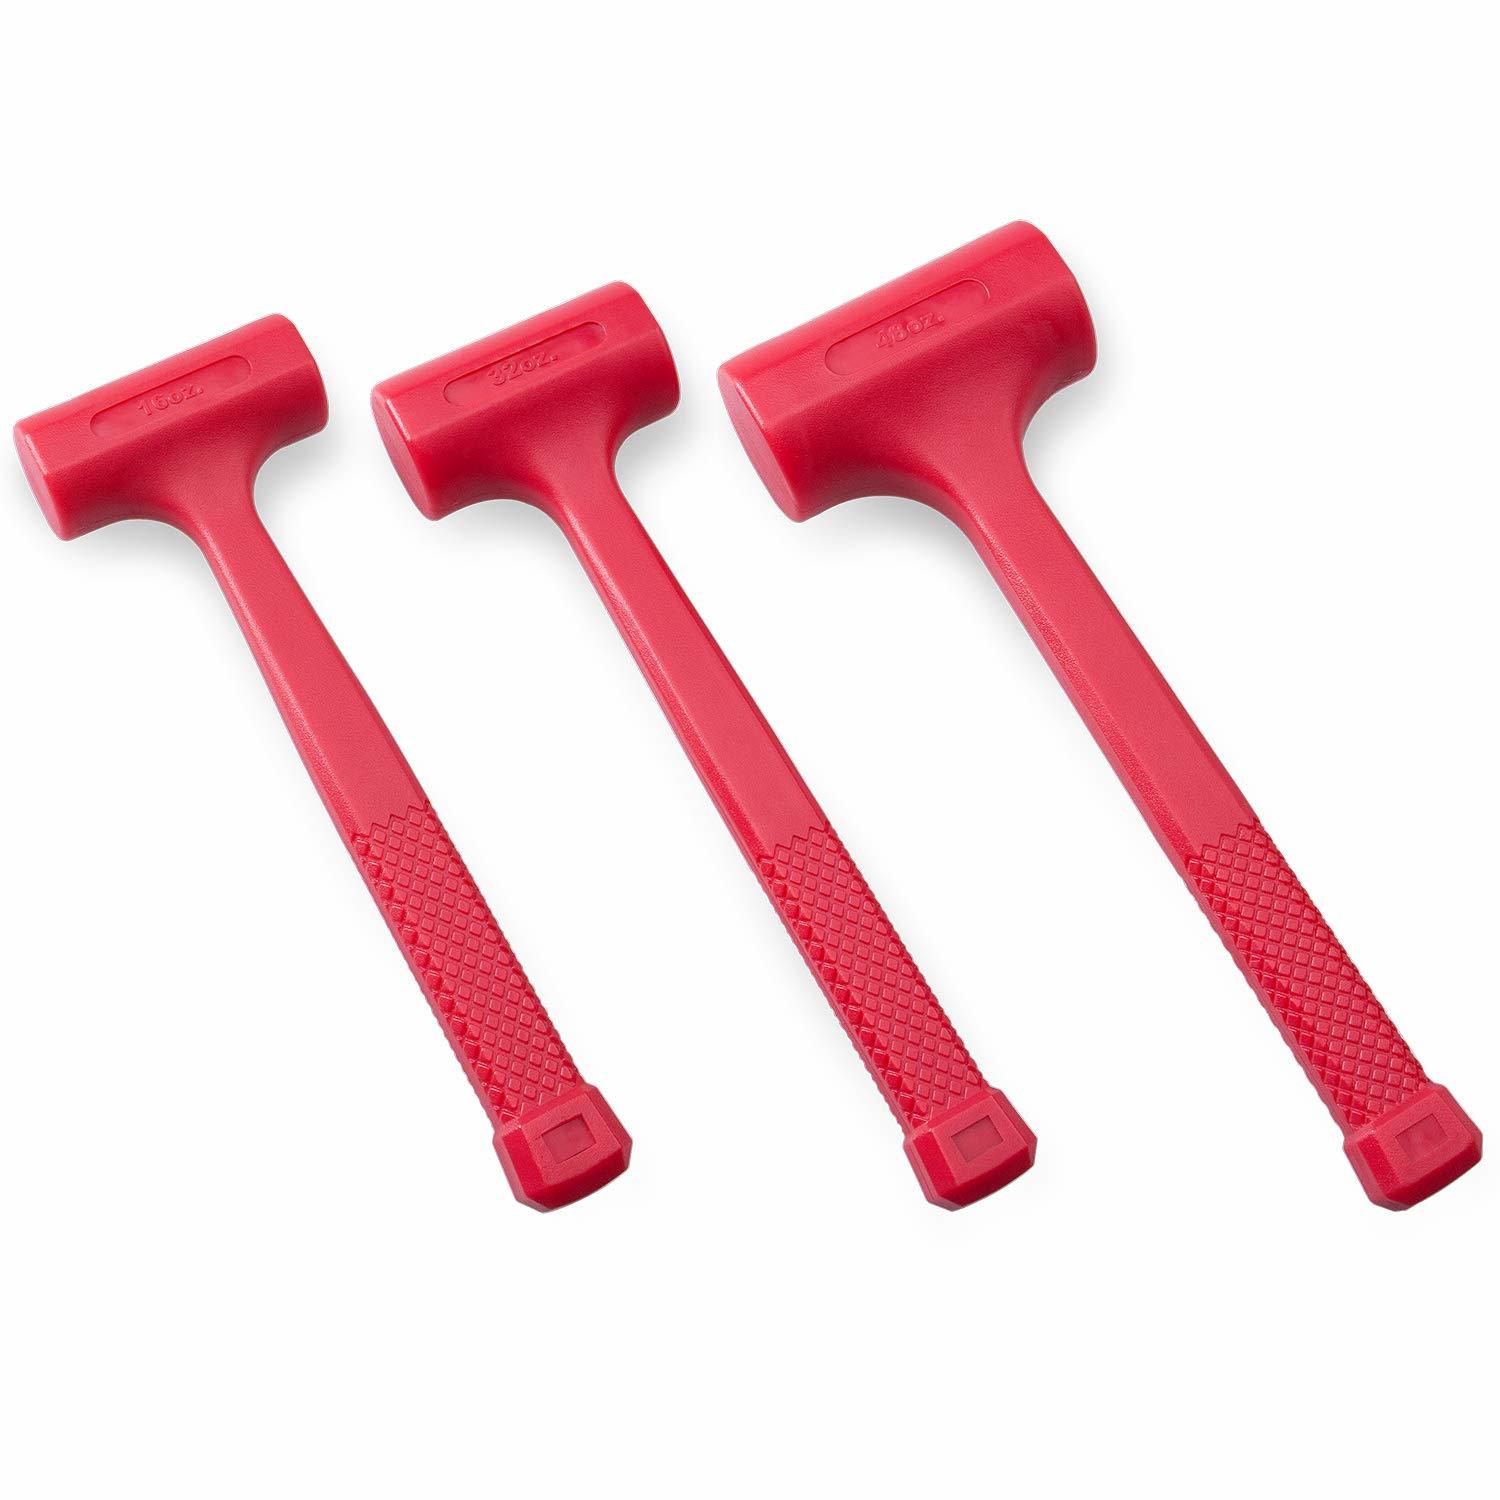 Primary image for 3-Piece Premium Dead Blow Hammer And Unicast Mallet Set - Include 16-Oz (1 Lb), 